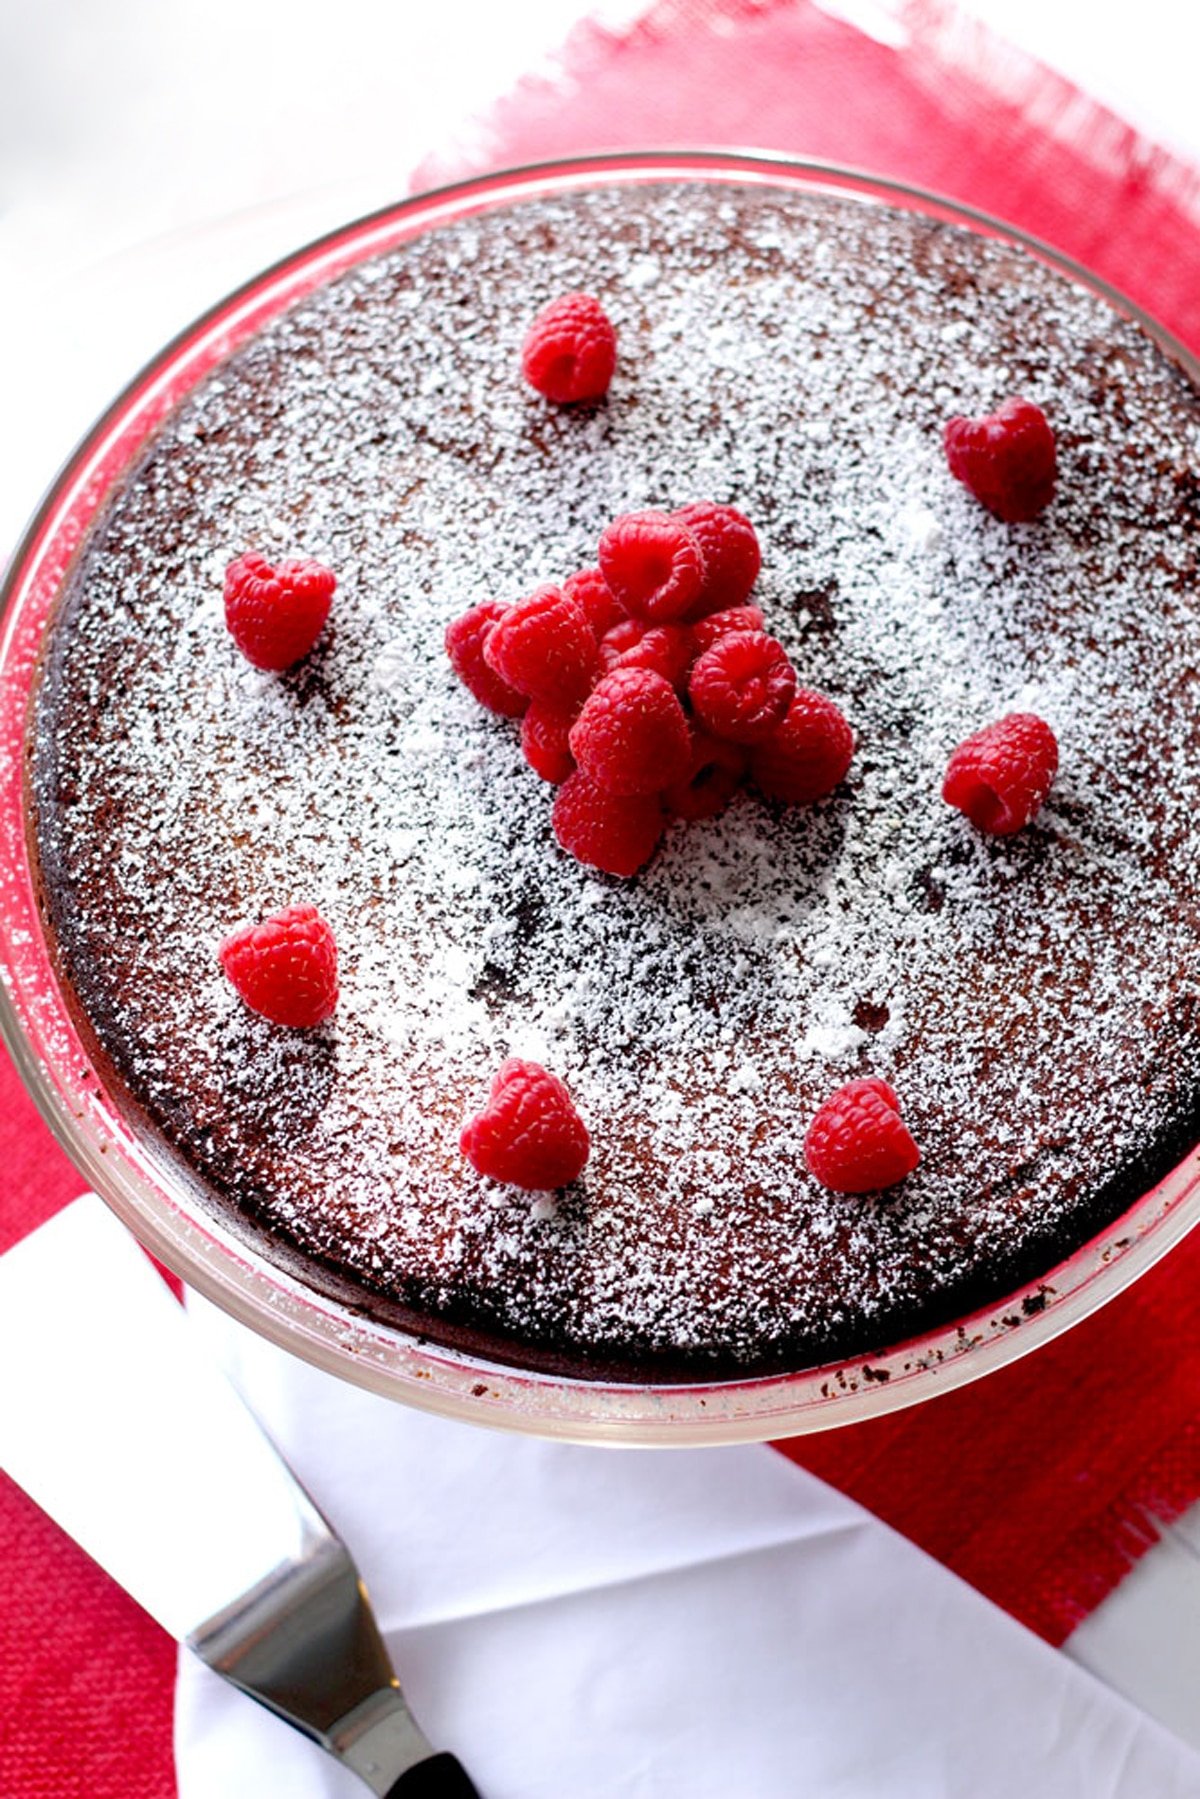 Flourless Chocolate Torte topped with powdered sugar and raspberries sitting on a cake dish, pie server on side.